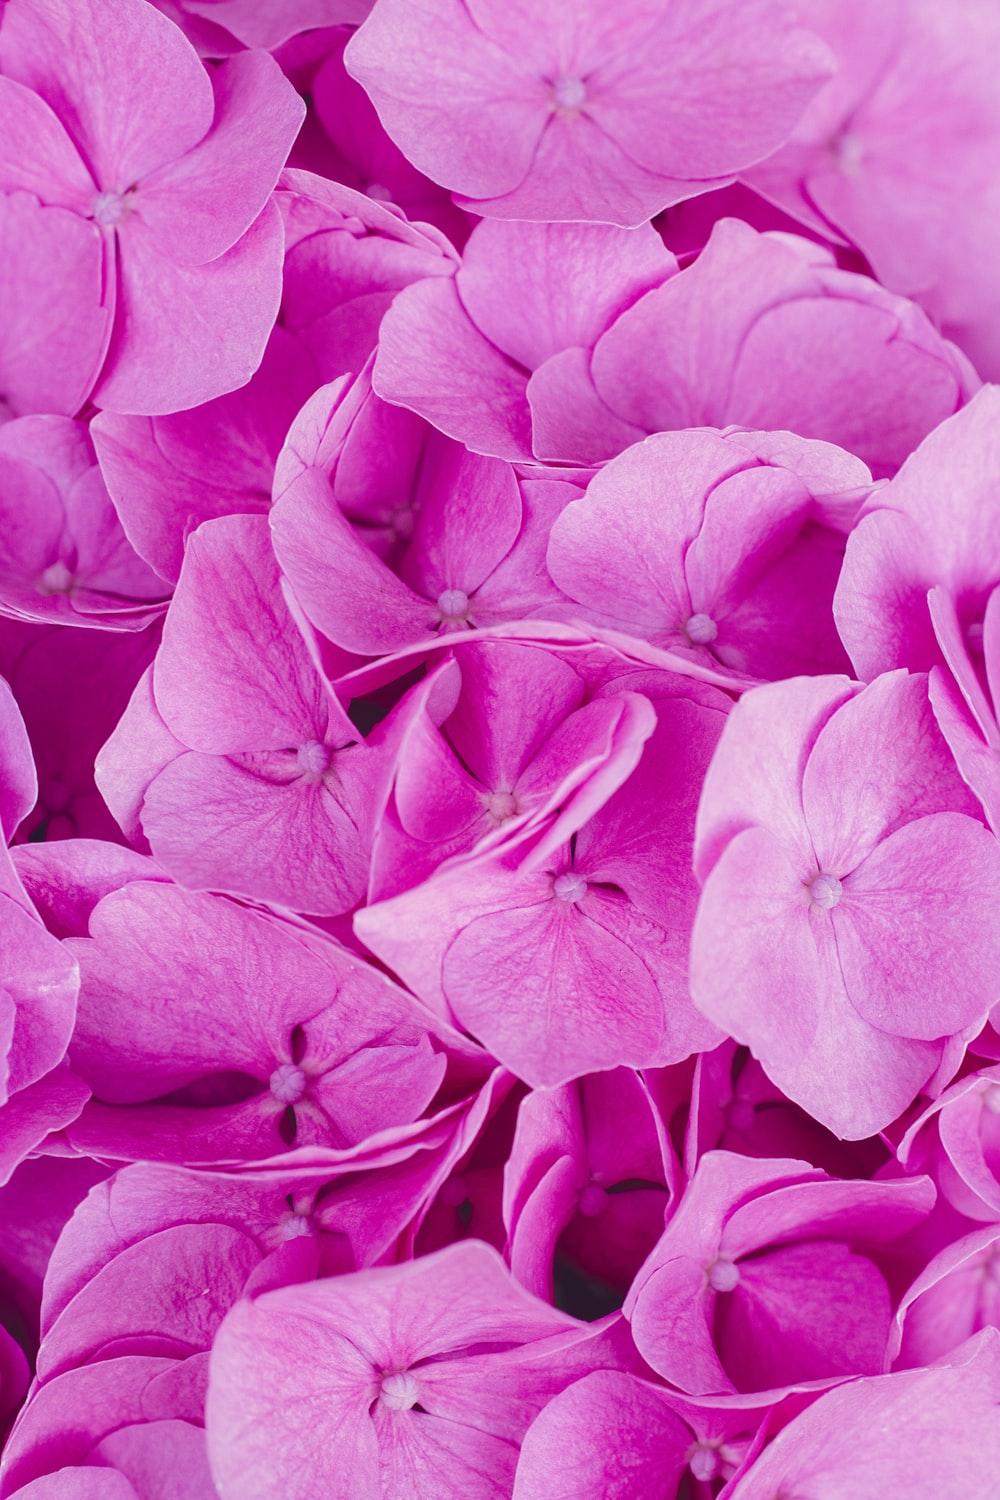 Pink Flower Picture. Download Free Image